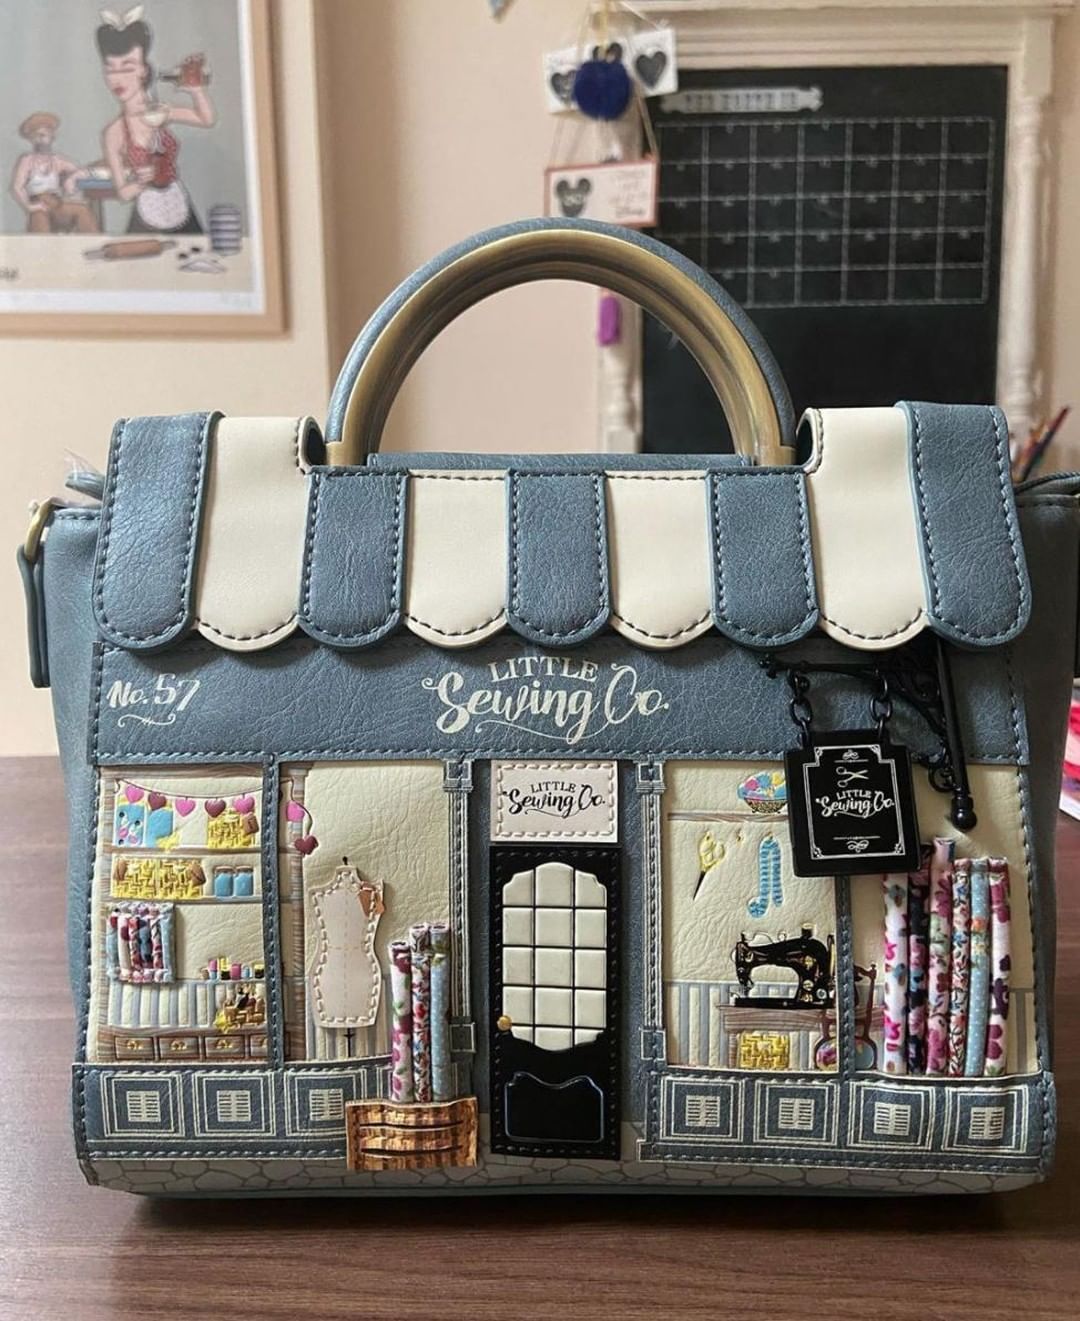 Vendula London Official - Look at the details on the Sewing Shop Vanity bag! 😍

Shop the range now in our Summer Sale on VendulaLondon.com!

📸: @retrololly

#vendulalondon